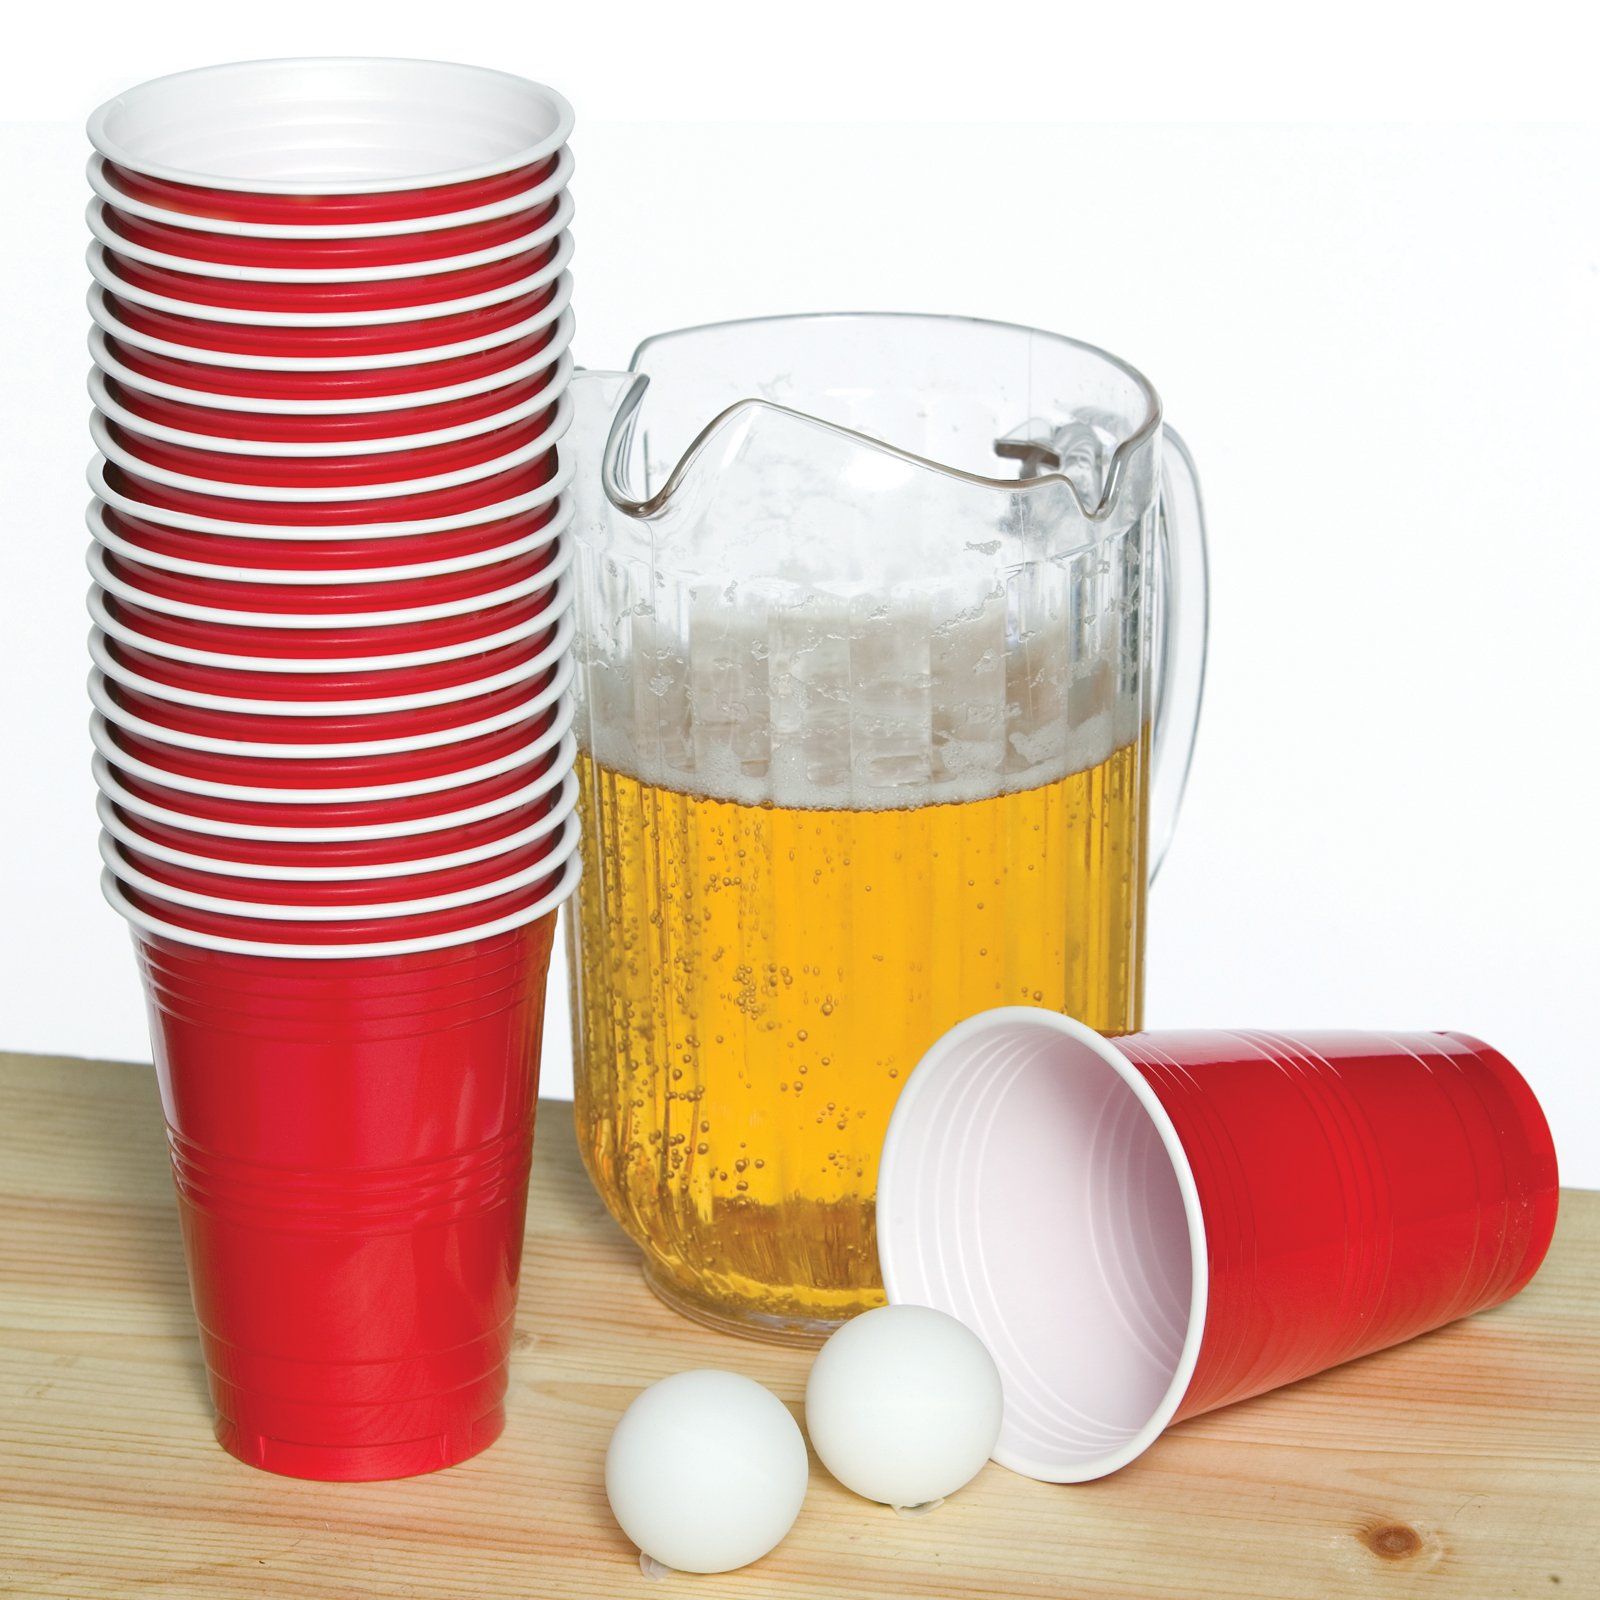 For the Love of Beer Pong…